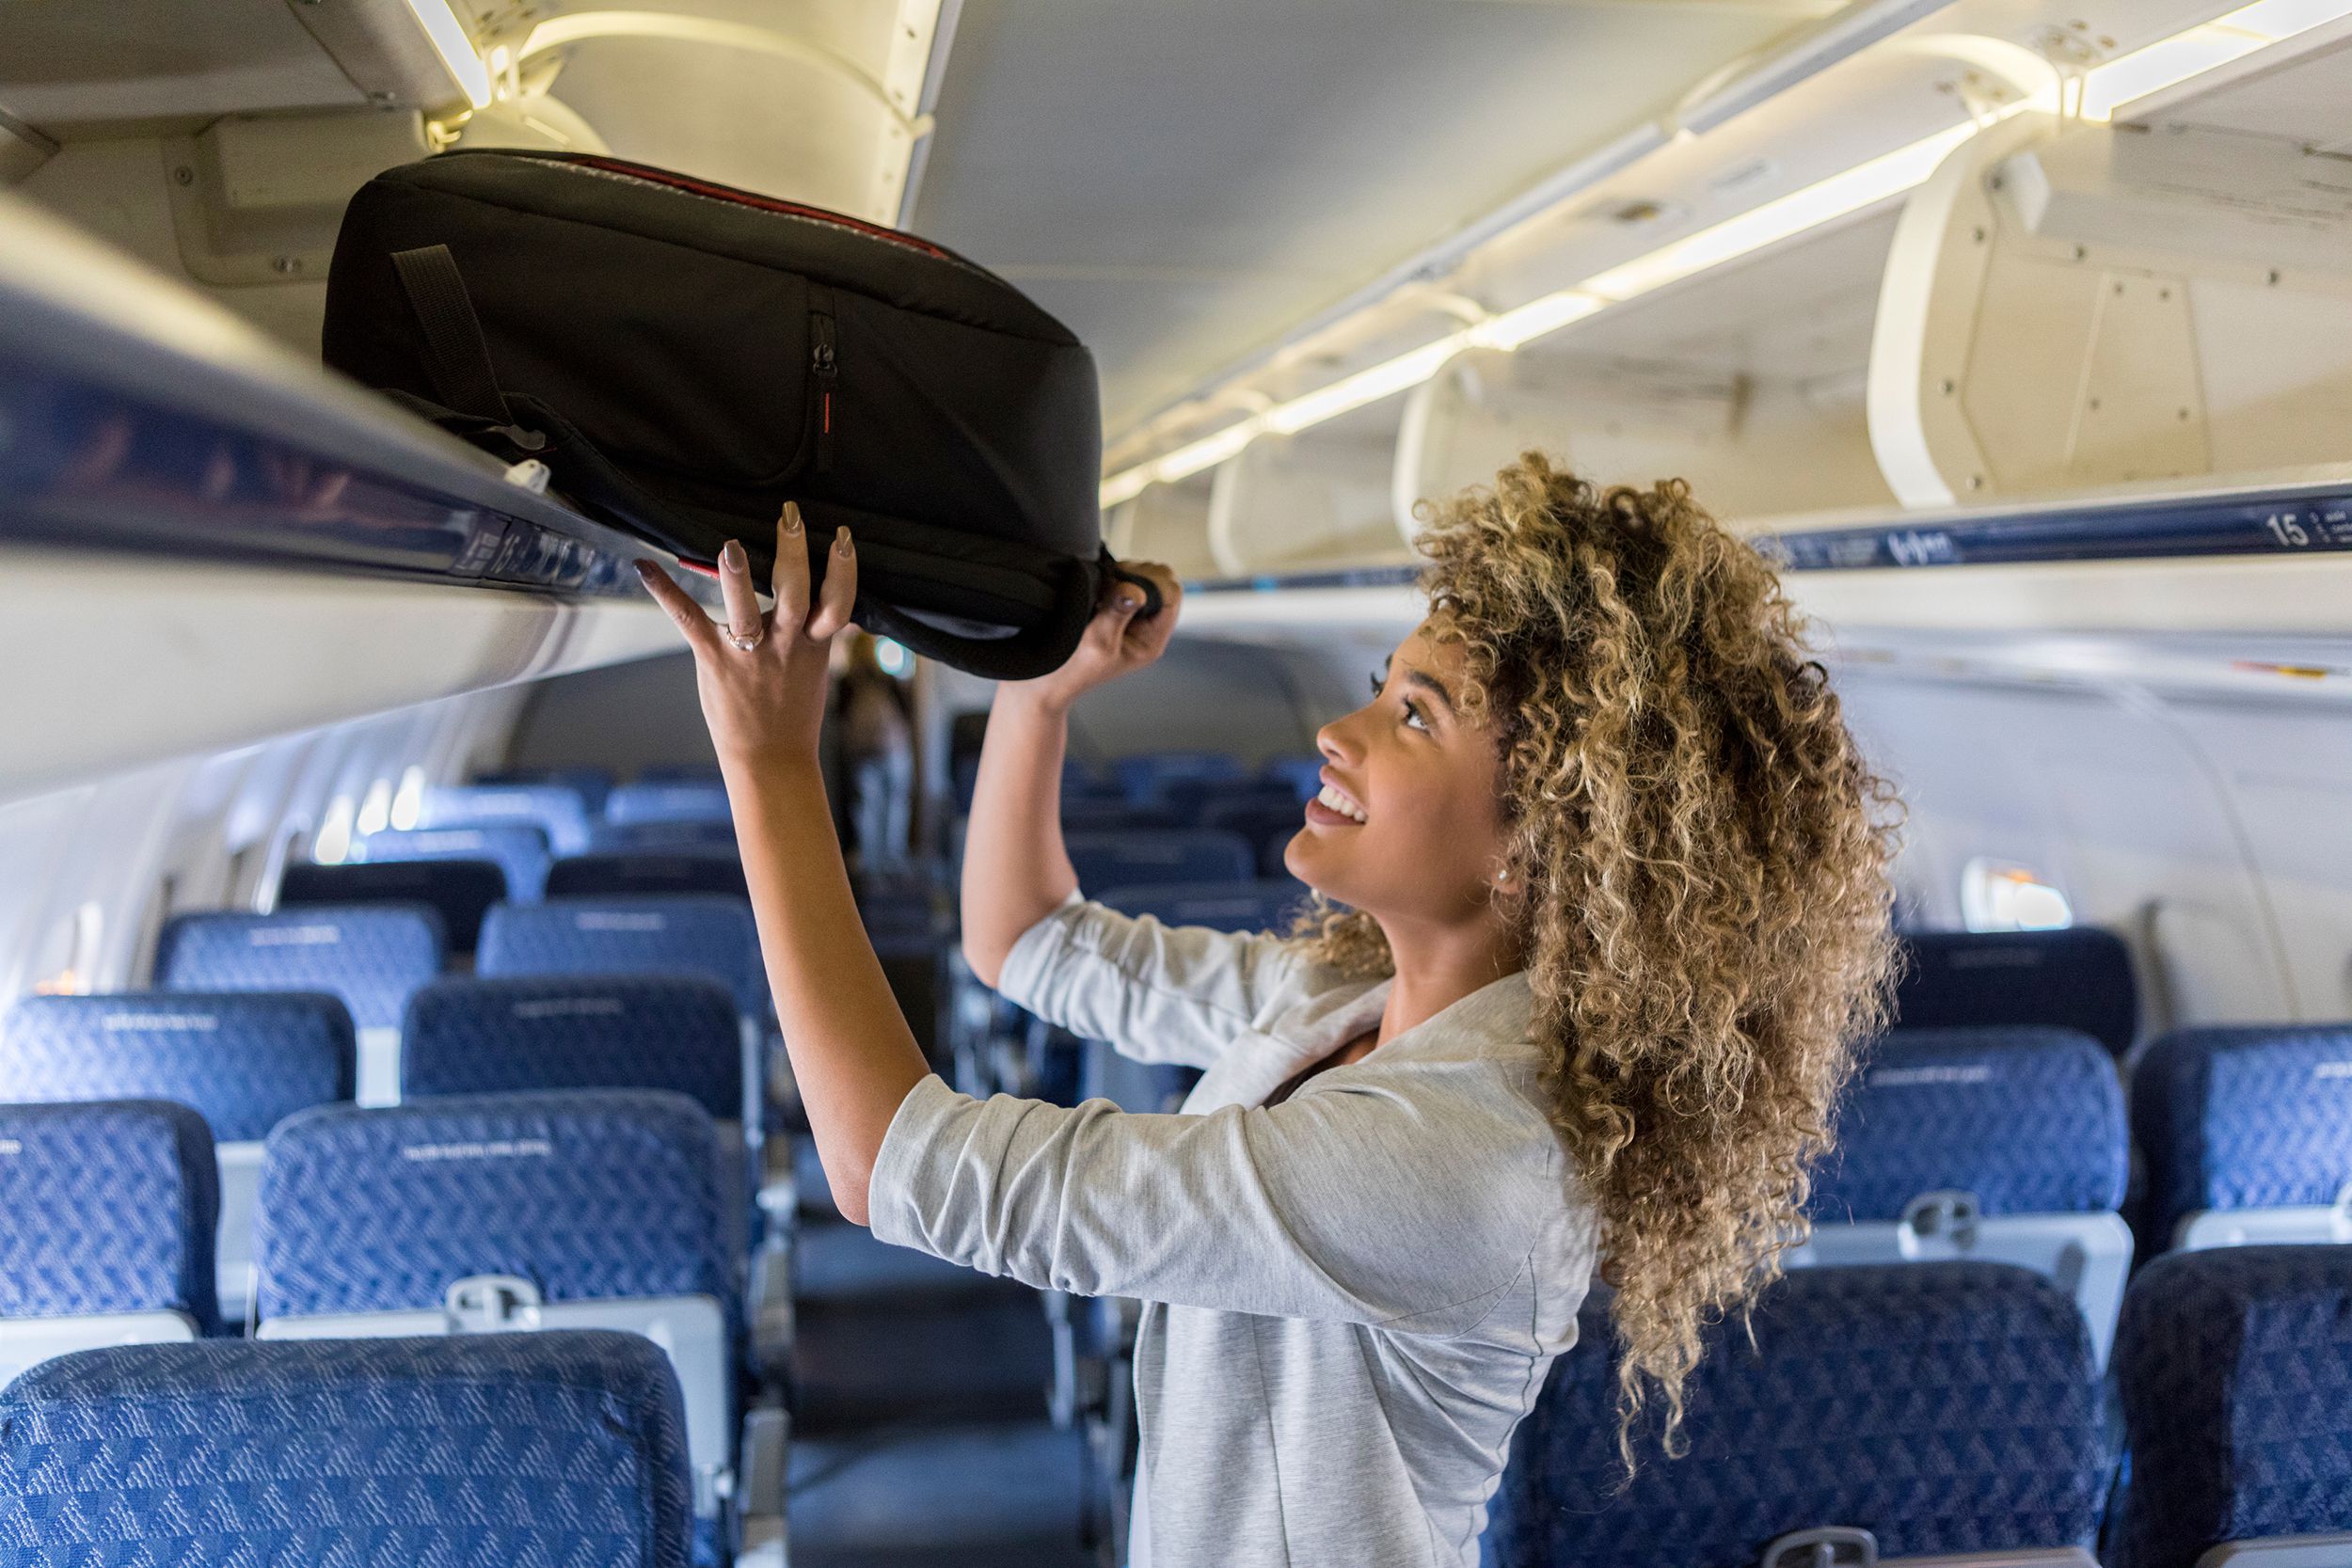 <p>Avoid airline baggage fees by packing only carry-on luggage. <a href="https://blog.cheapism.com/carry-on-packing-tips-3705/">Tips include</a> wearing bulky clothing on the plane and bringing as large a "personal item" as the airline will allow. If you're brave enough to stand out in the security line, try a <a href="https://www.amazon.com/dp/B01E4KAT48/ref=as_li_ss_tl?ie=UTF8&linkCode=ll1&tag=msnshop-20&linkId=1791d58b743210b8b2df437c26561ba8&language=en_US">travel jacket</a> that lets you stash extra items on your person instead of taking up room in your carry-on or personal item.</p>